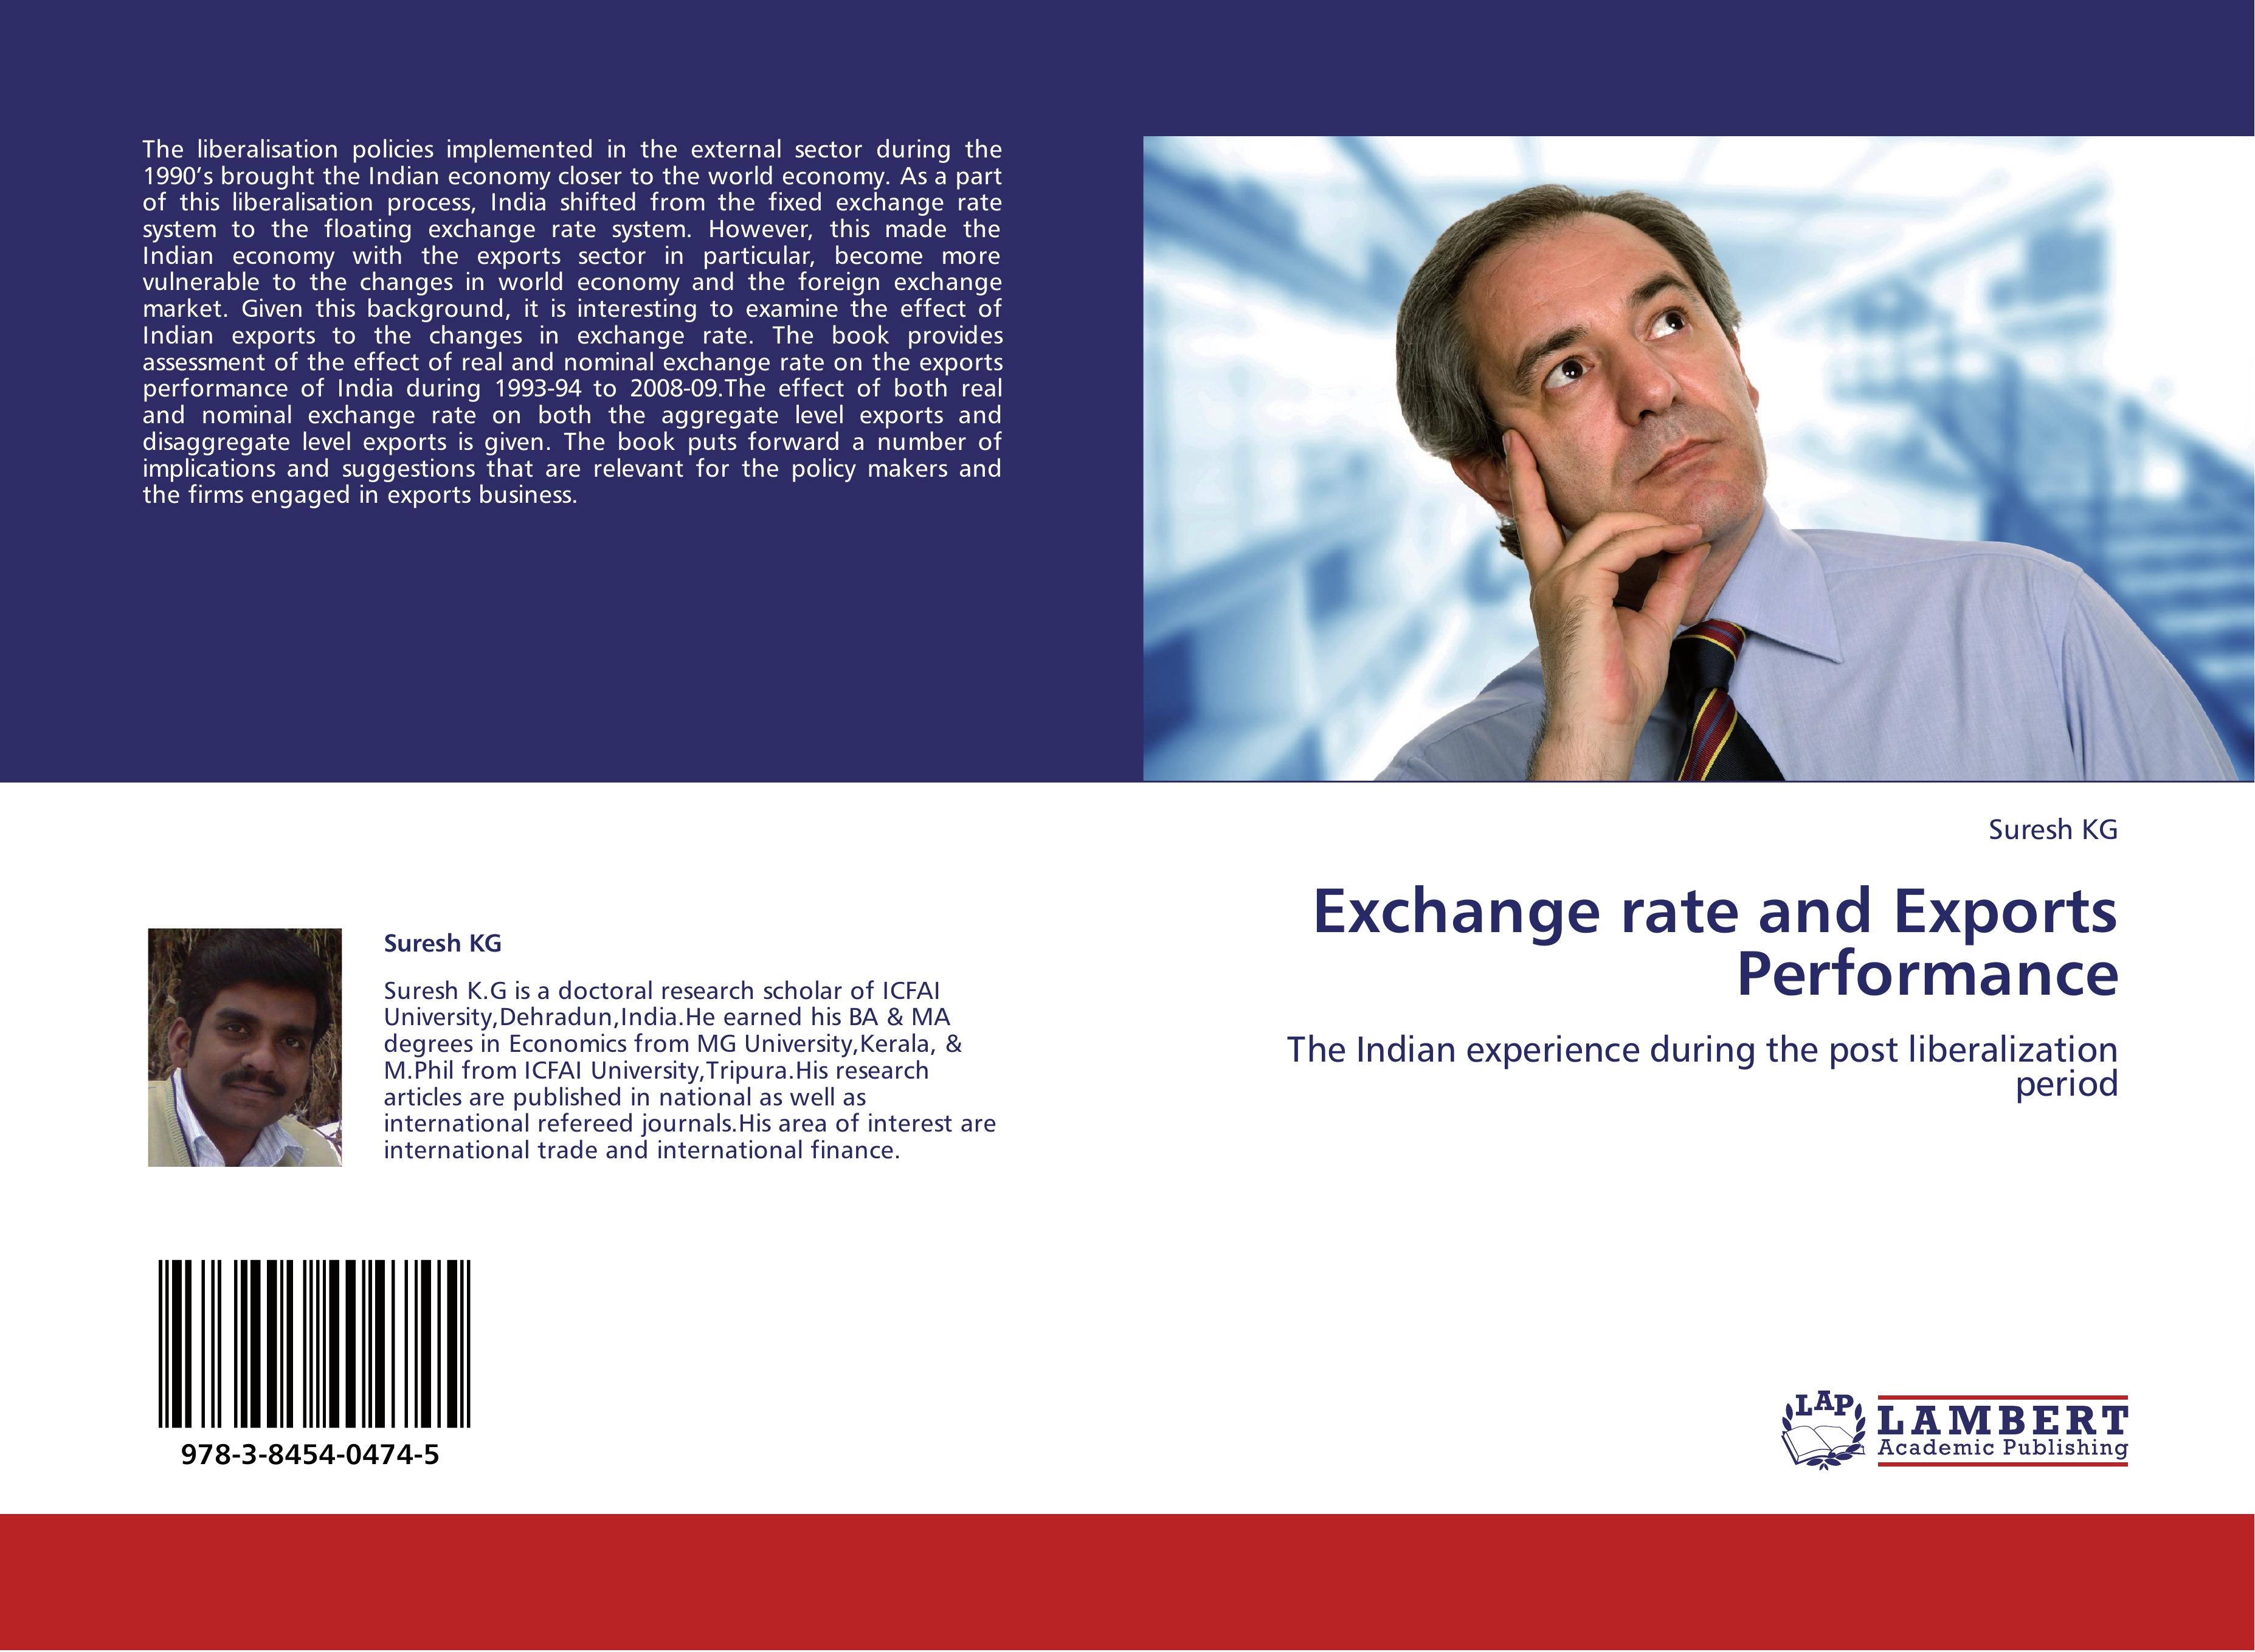 Exchange rate and Exports Performance - Suresh KG